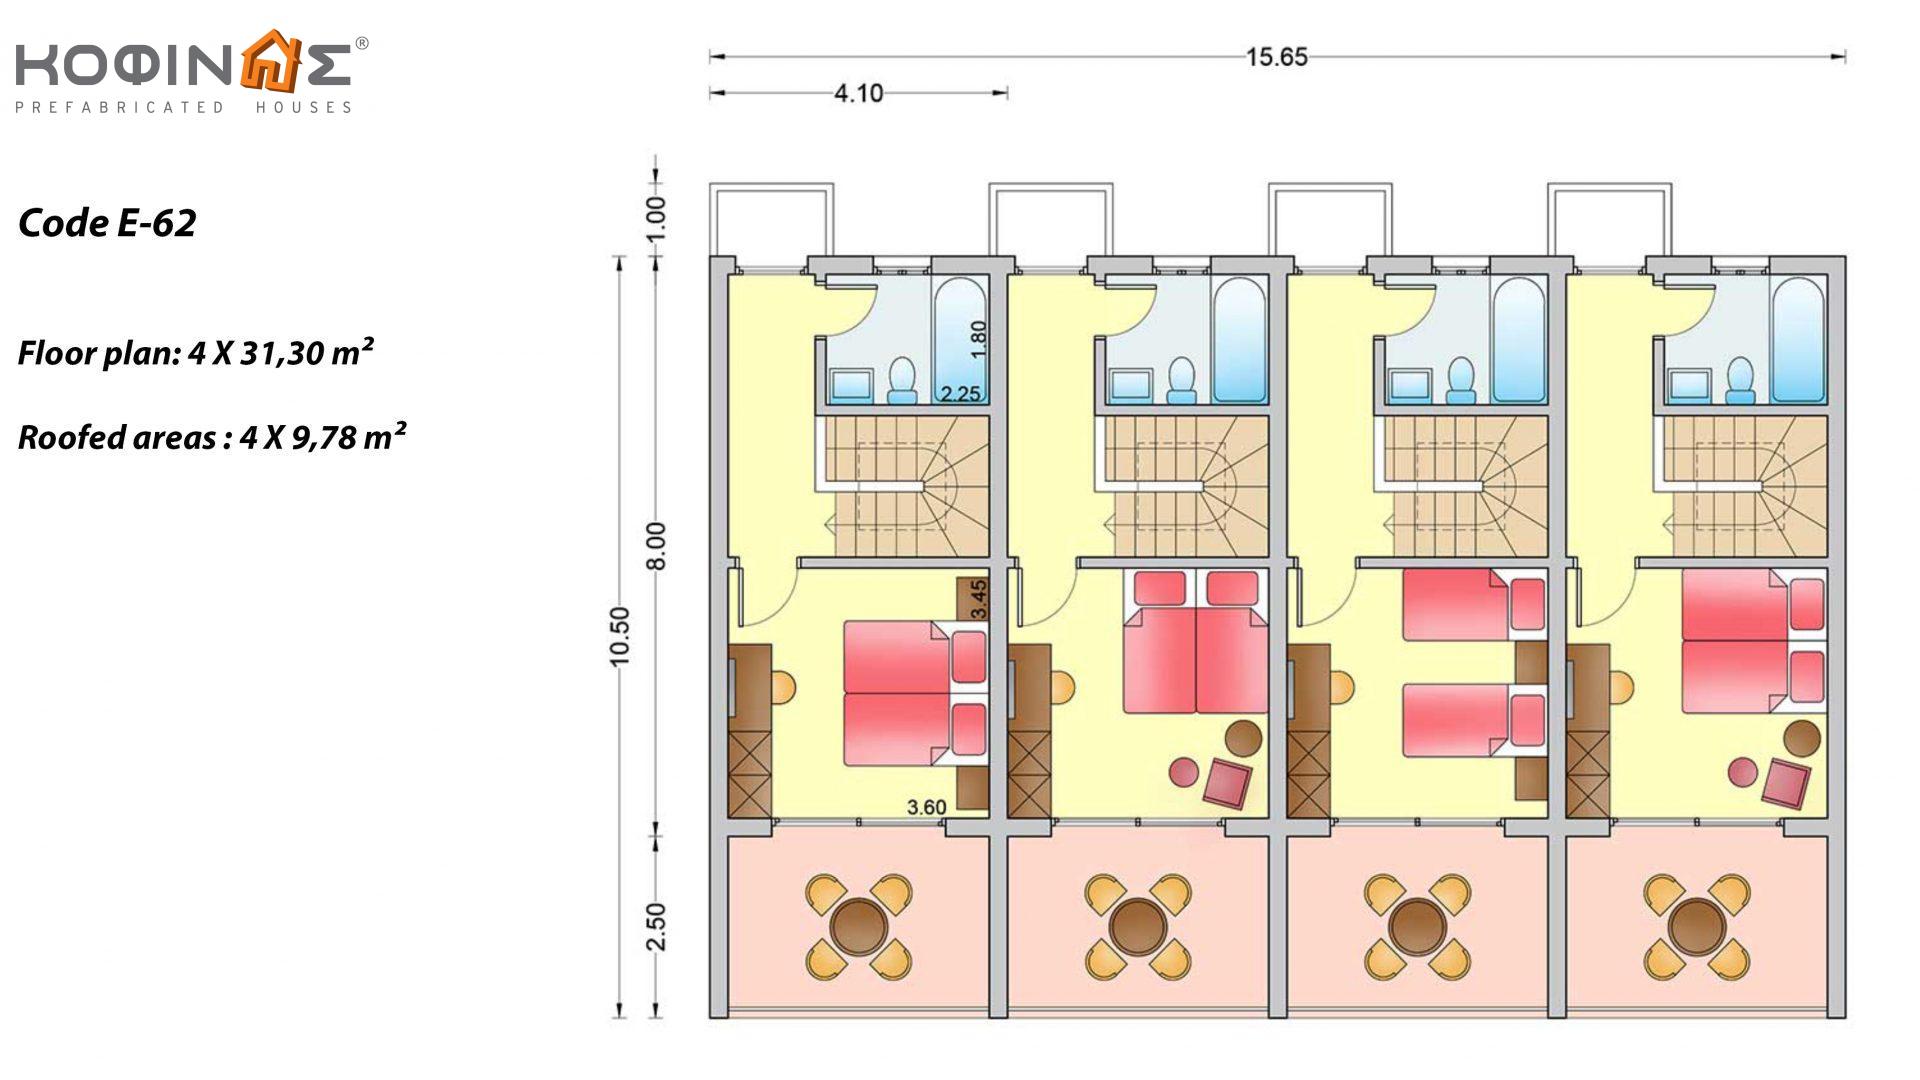 Complex of 2-story houses E-62, total surface of 250,40 m² (4 x 62,60 m²), covered areas 85,04 m²